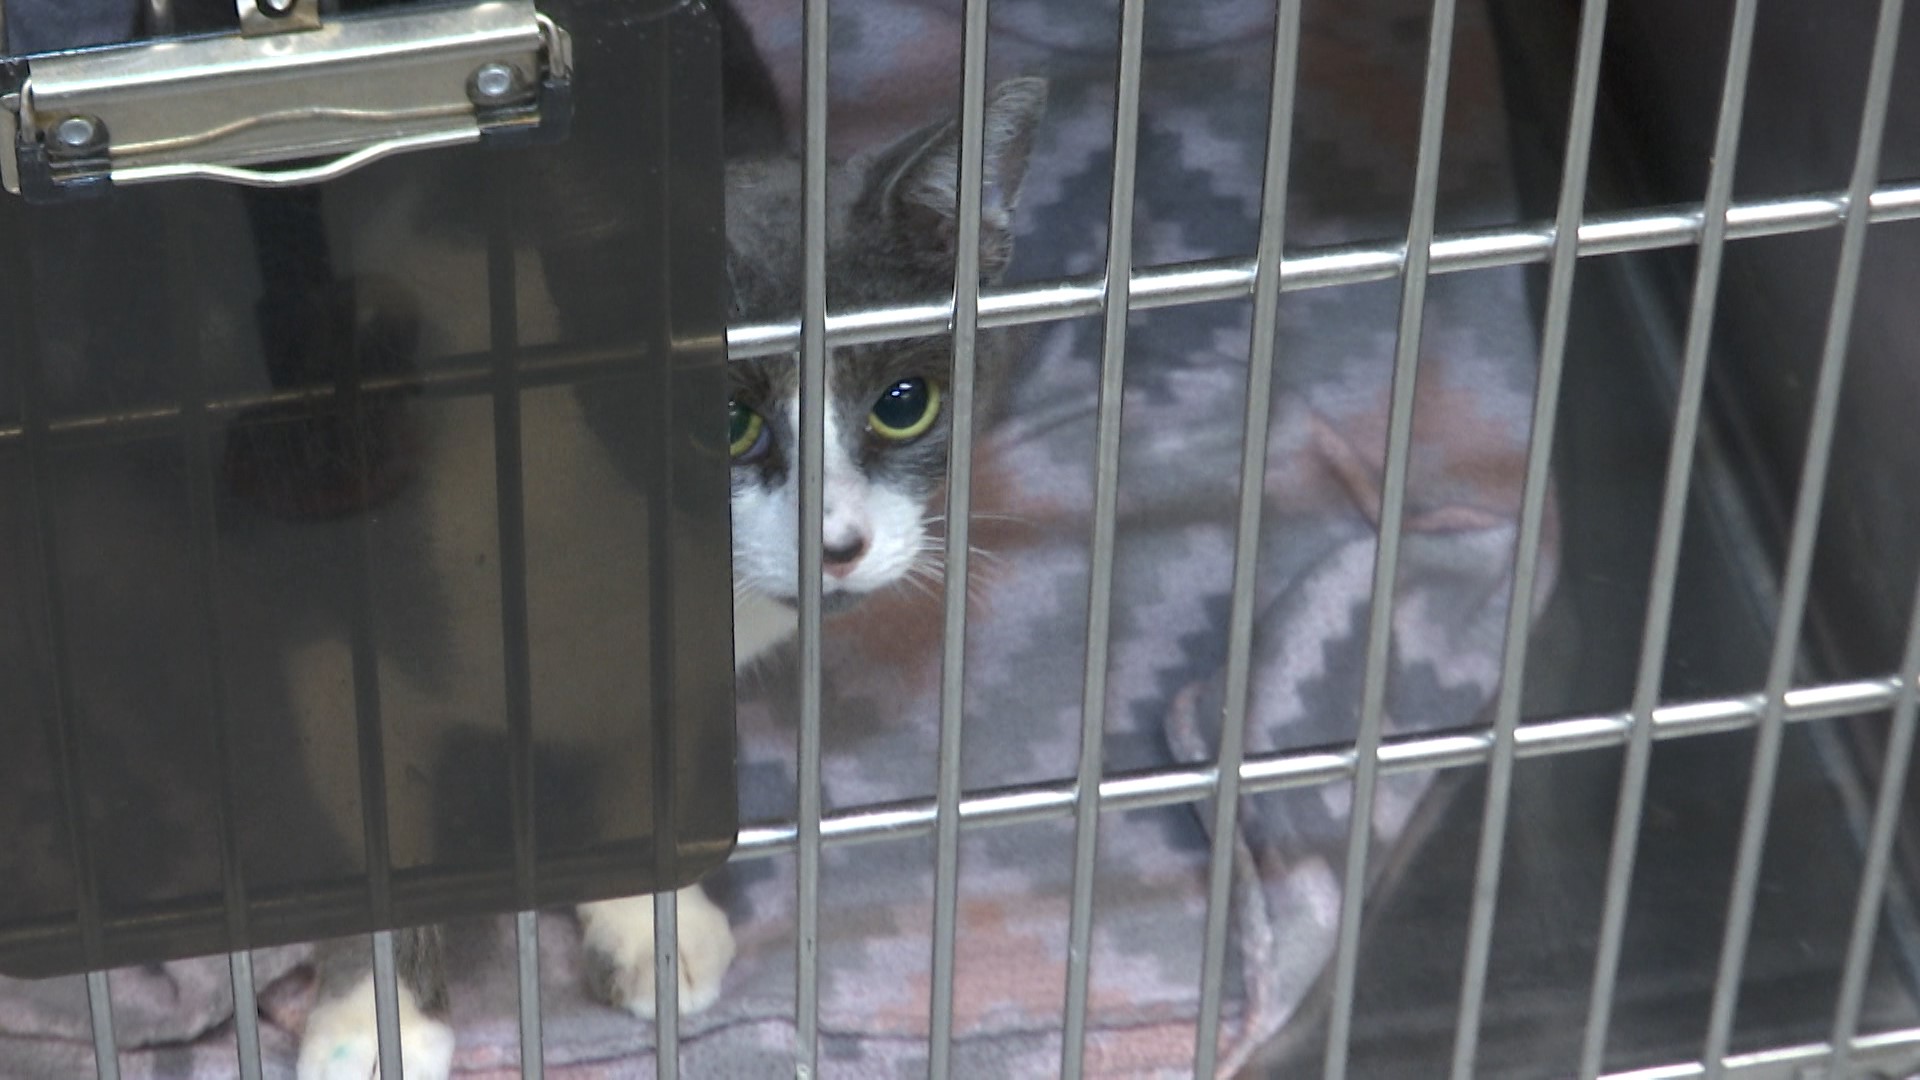 Over 30 cats rescued from one home, now they all need homes |  